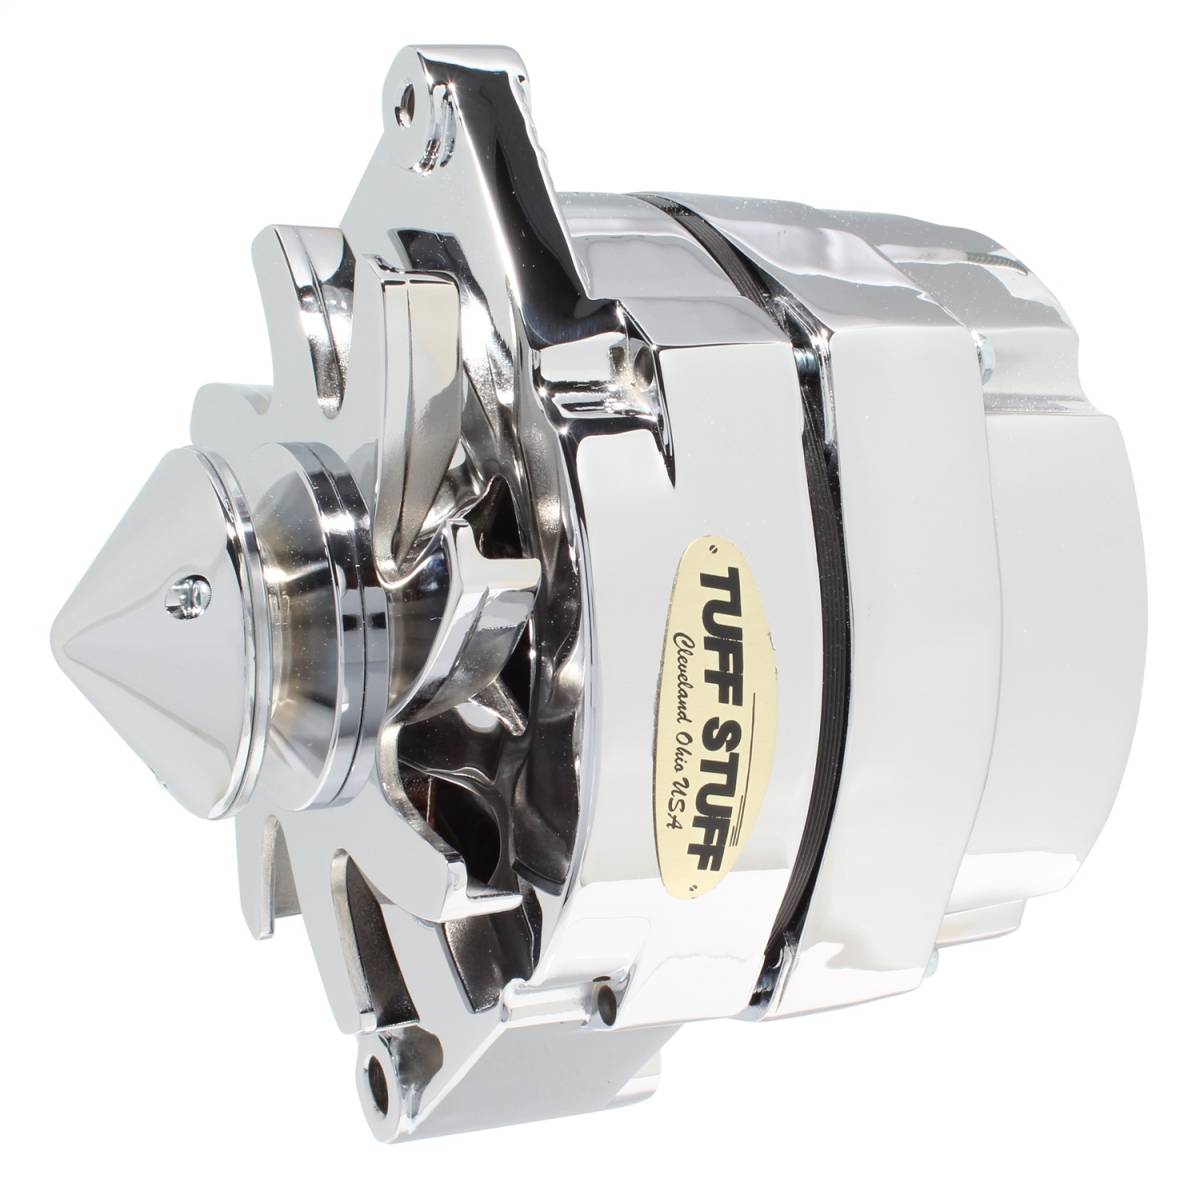 Tuff Stuff Performance - Silver Bullet Alternator 100 AMP OEM Or 1 Wire V Groove Bullet Pulley 4.85 in. Case Depth Lower Mount Boss 2 in. Long Polished 12 Clocking 7139BBULL12